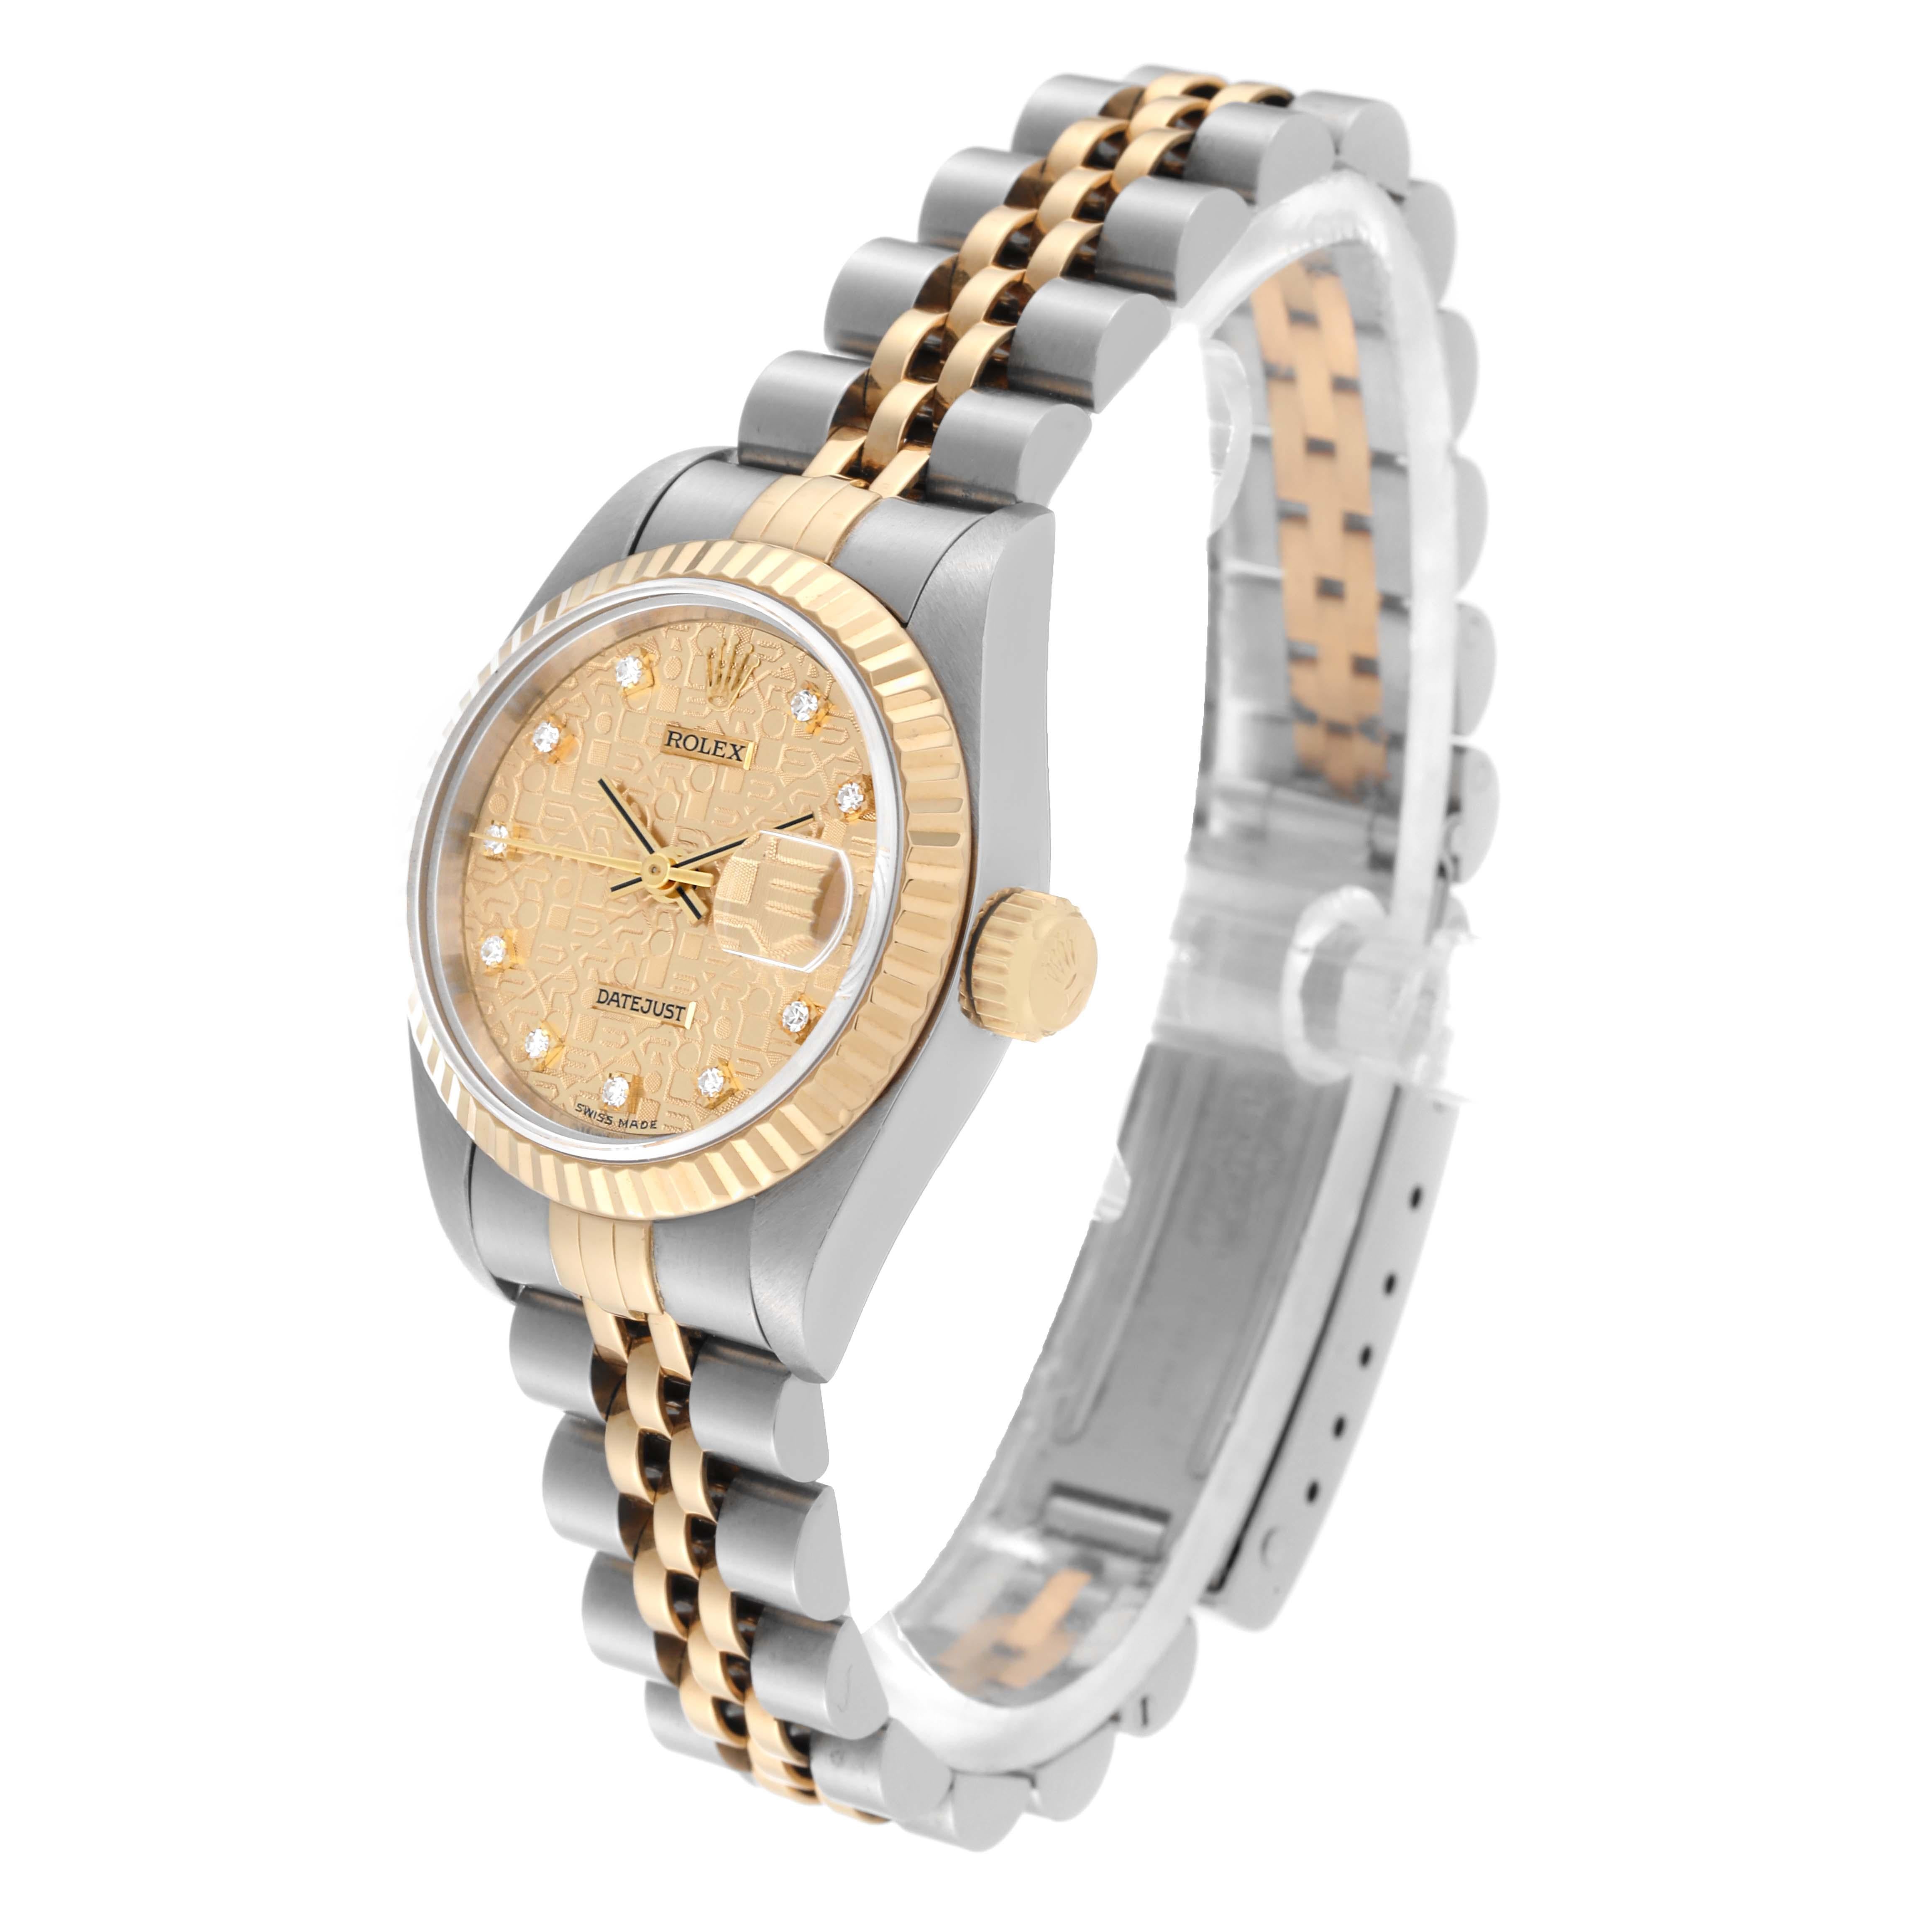 Rolex Datejust Anniversary Diamond Dial Steel Yellow Gold Ladies Watch 69173 For Sale 7